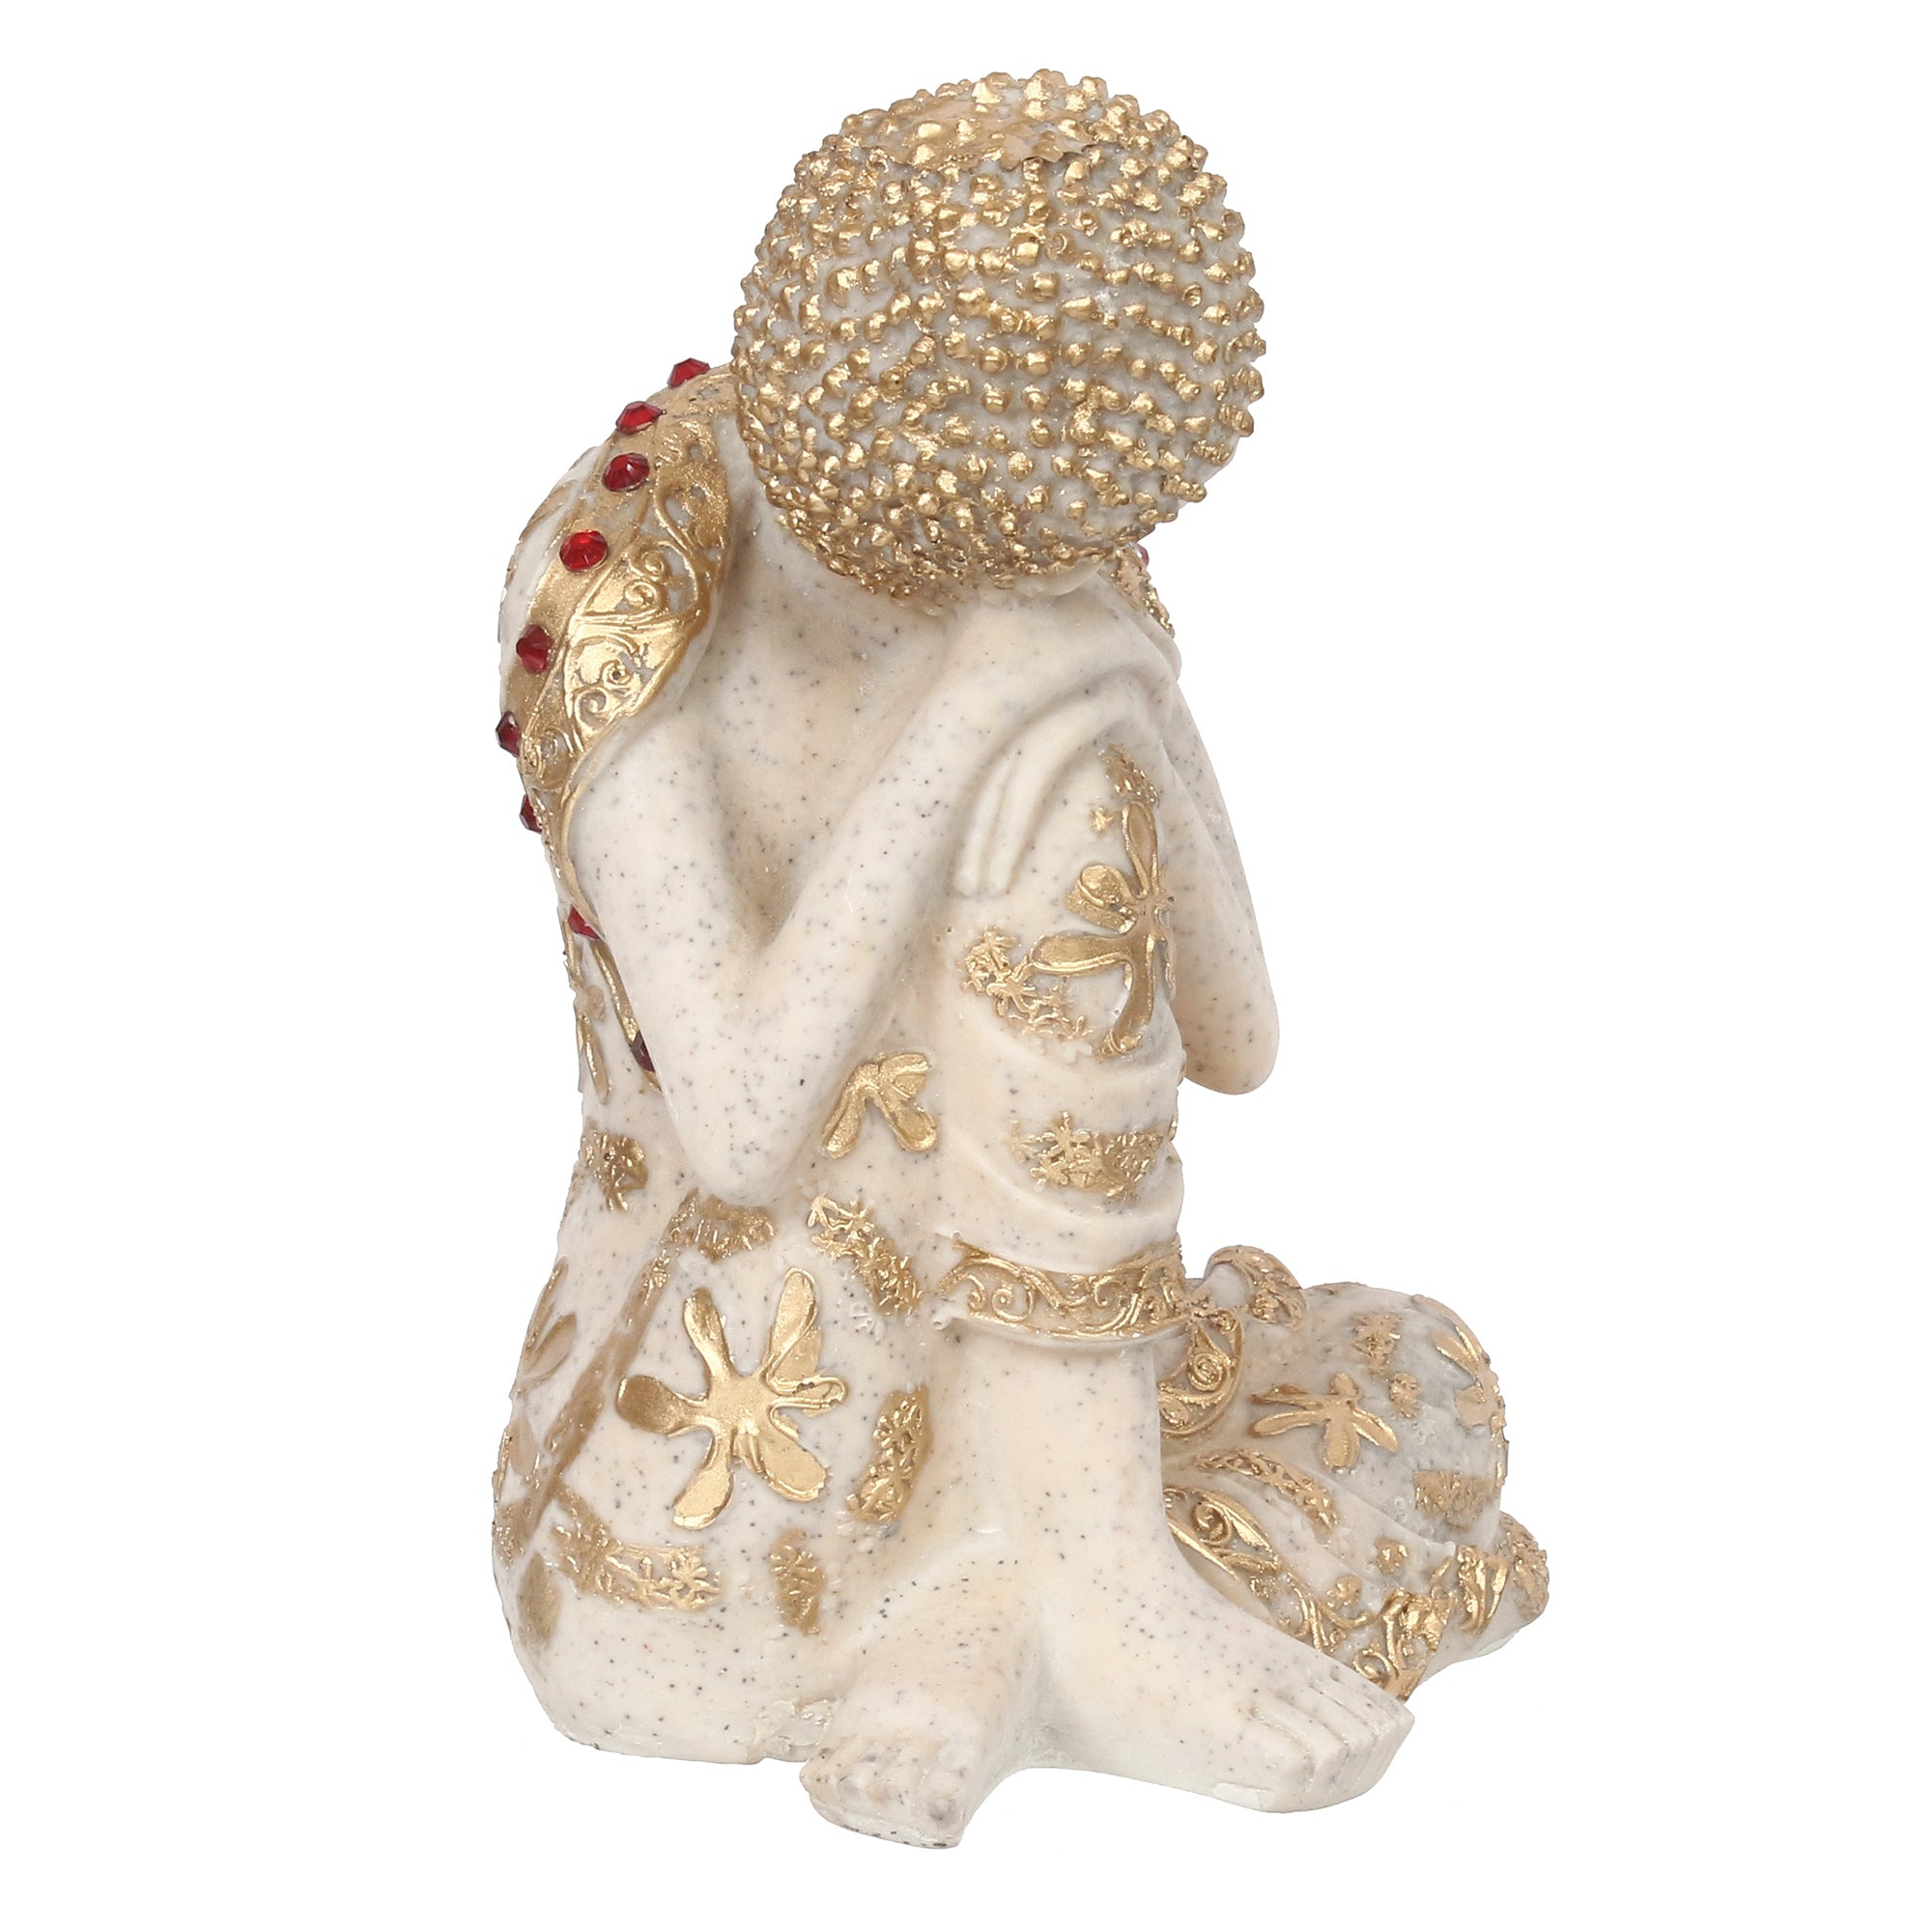 Polyresin White and Golden Resting Buddha on Knee Statue 4